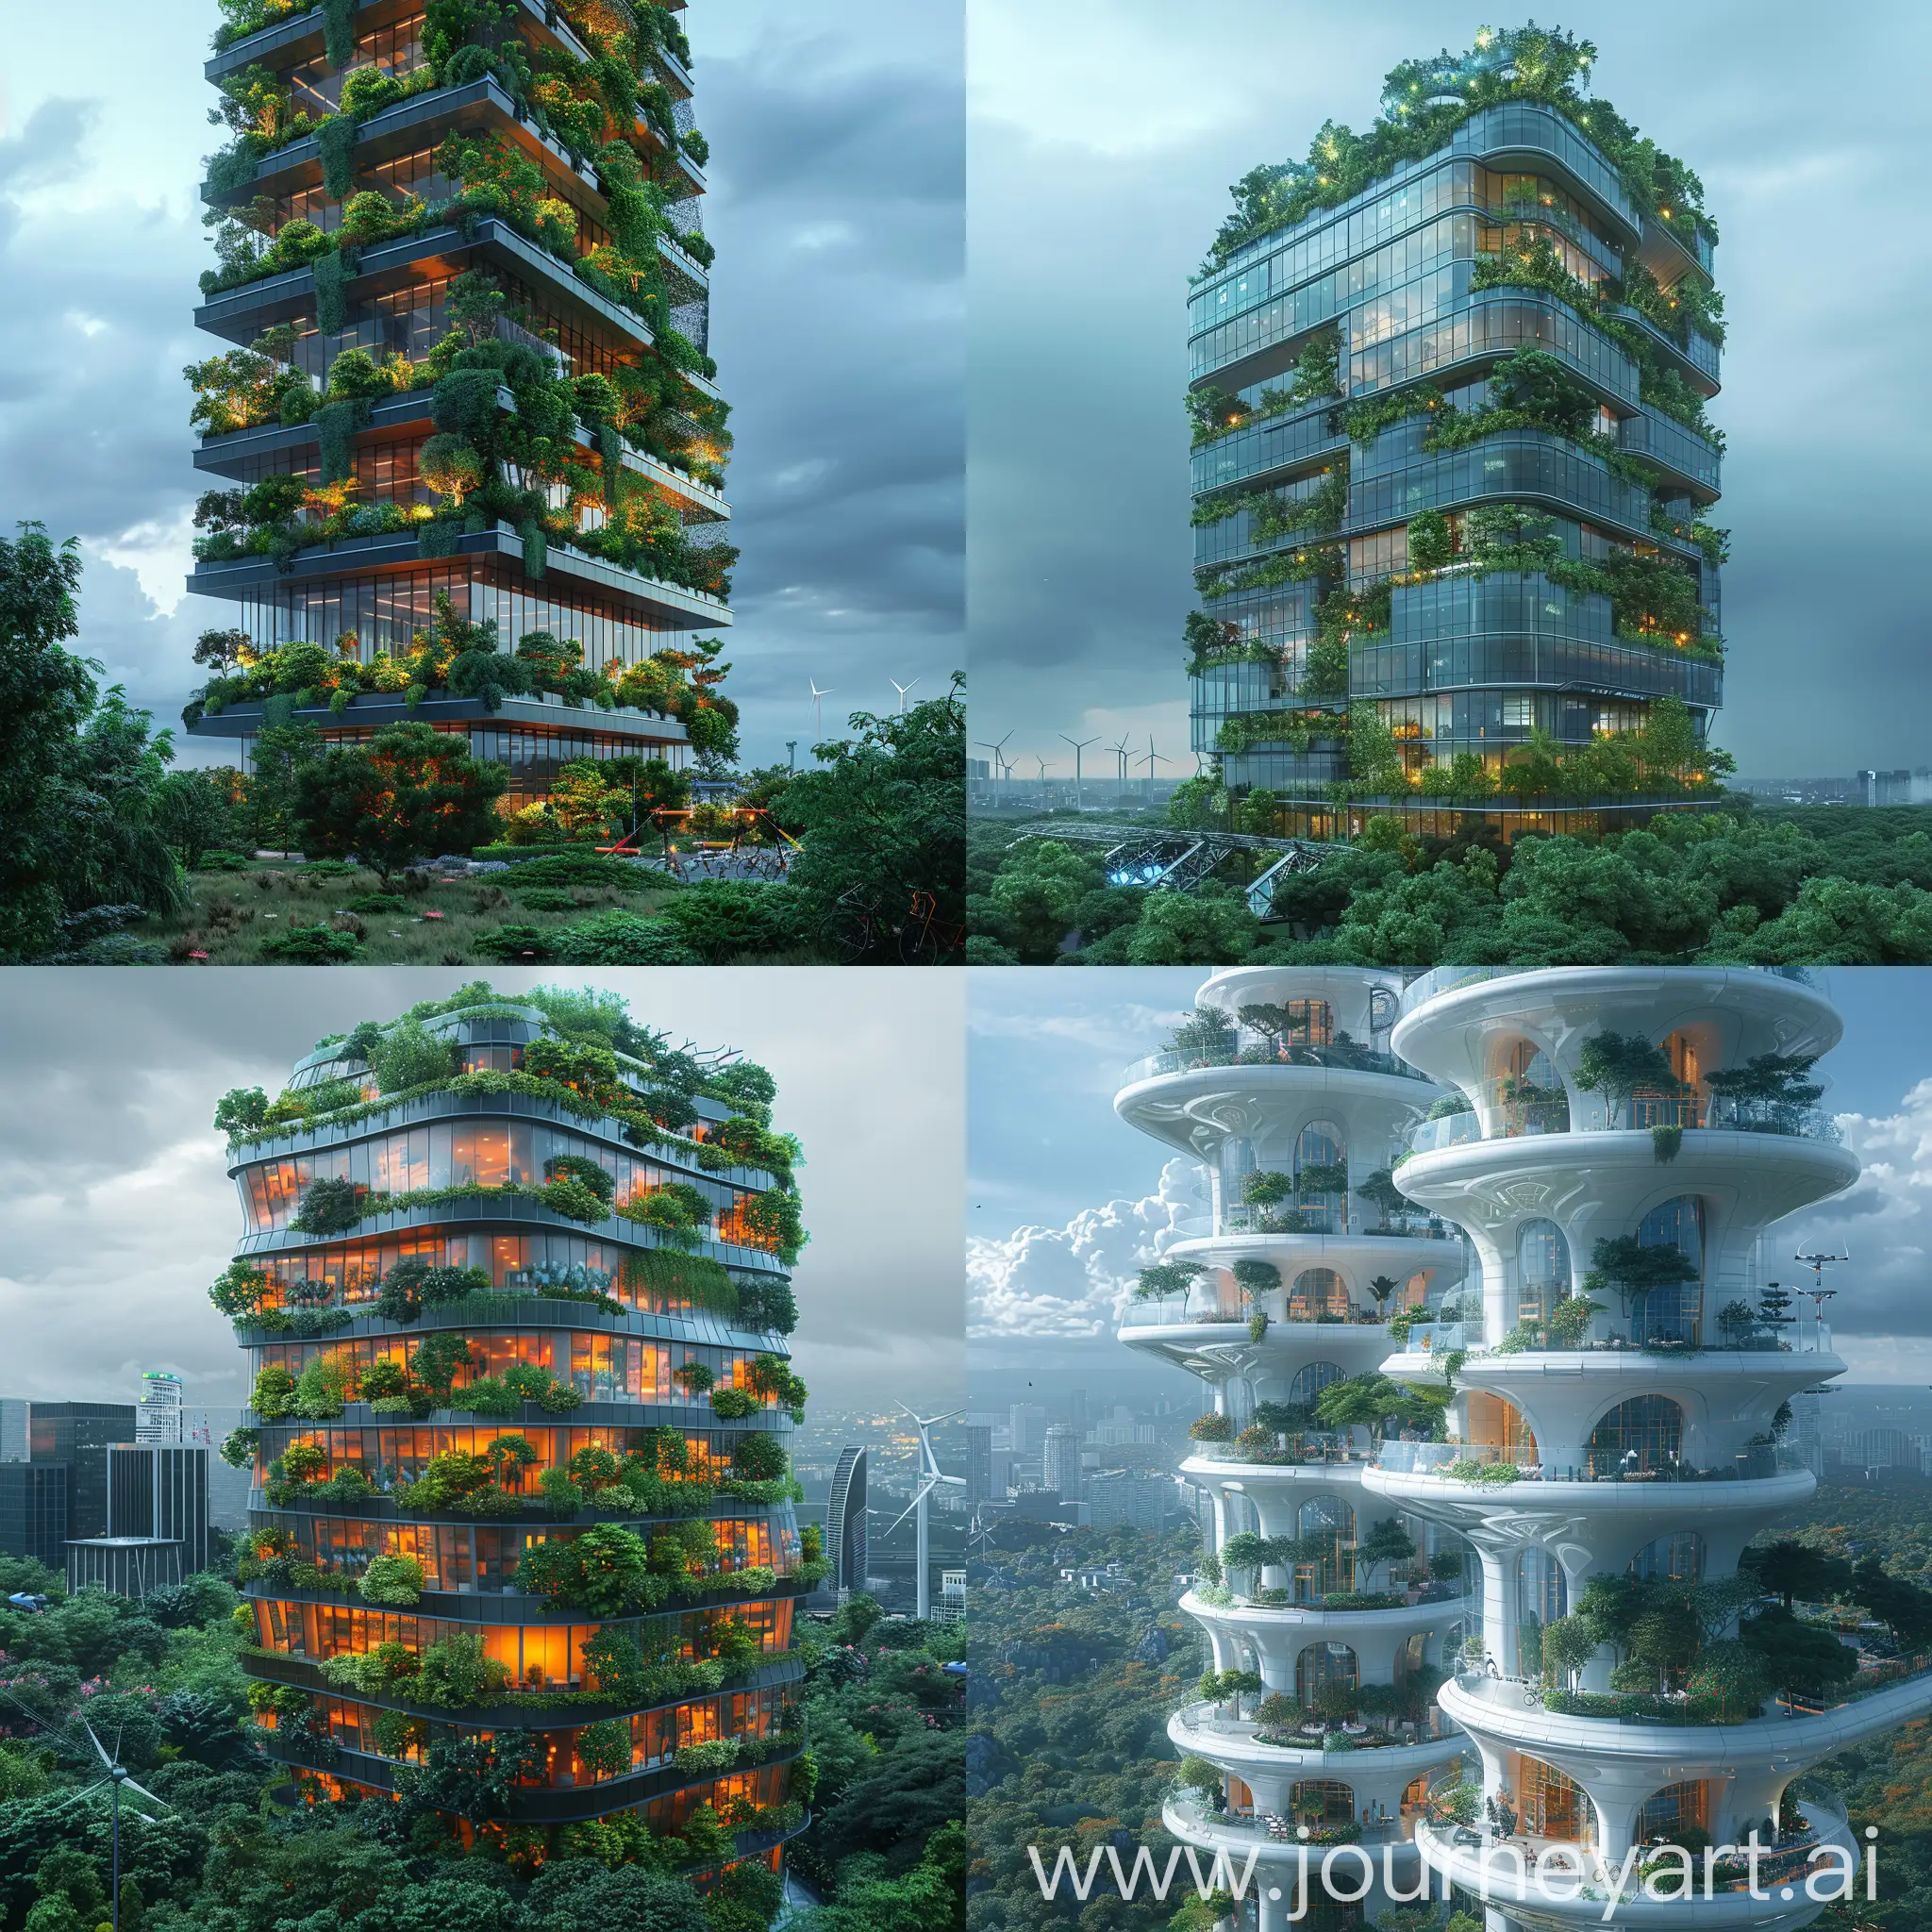 Futuristic skyscraper, Smart Glass Facade, Vertical Gardens, Skybridges, Energy-Generating Facades, Holographic Displays, Automated Parking System, Drone Delivery Stations, Self-Cleaning Materials, AI Building Management System, Vertical Transportation Pods, Green Roofs, Wind Turbines, Rainwater Harvesting System, Rainwater Harvesting System, High-Efficiency HVAC System, Natural Ventilation, Recycled Building Materials, Low-E Glass, LED Lighting, Bicycle Parking and Charging Stations, Self-Healing Materials, Nanocoatings, Nanofiltration Systems, Nanogenerators, Nanocomposite Insulation, Nanosensors, Nanophotonic Windows, Nanotech Solar Panels, Nanomembranes, Nanomaterial Reinforcement, octane render --stylize 1000